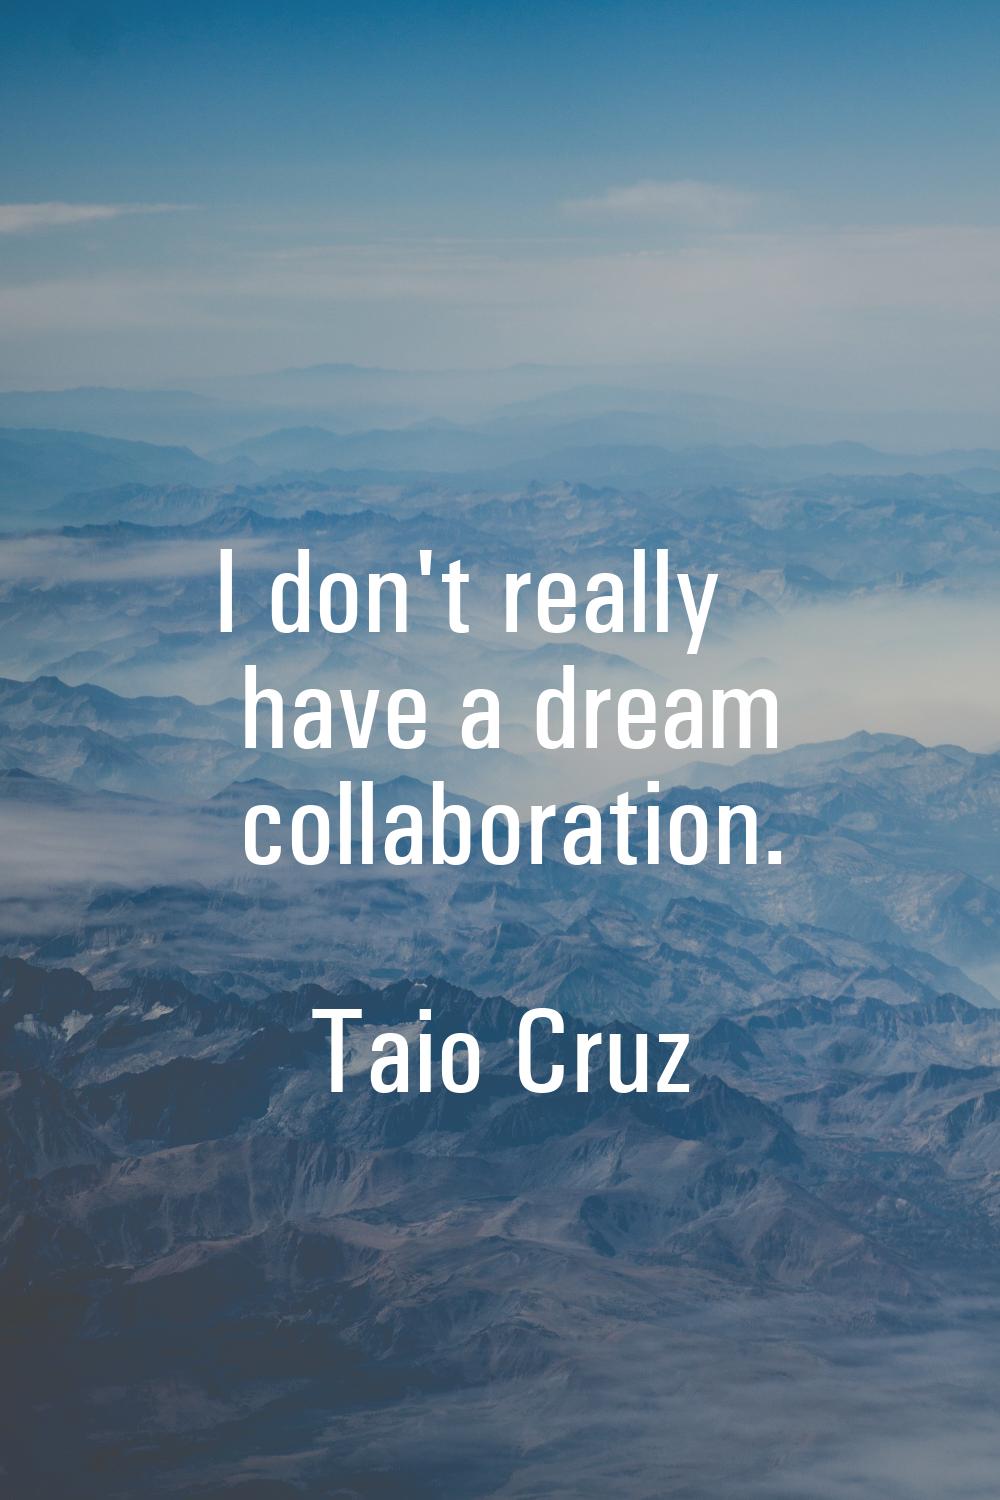 I don't really have a dream collaboration.